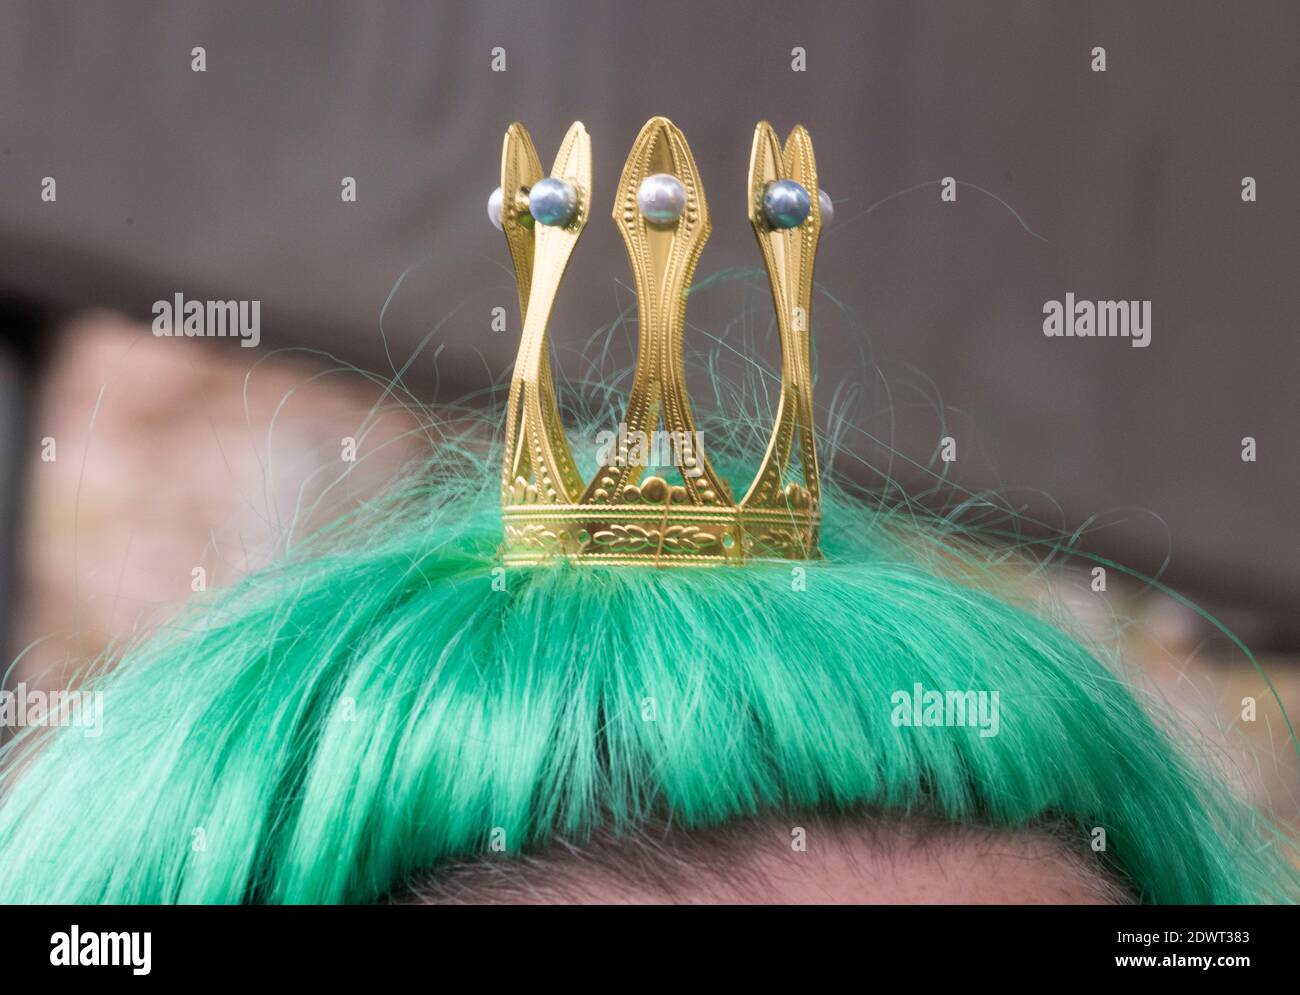 a crown or a coronet, symbol for nobility and power Stock Photo